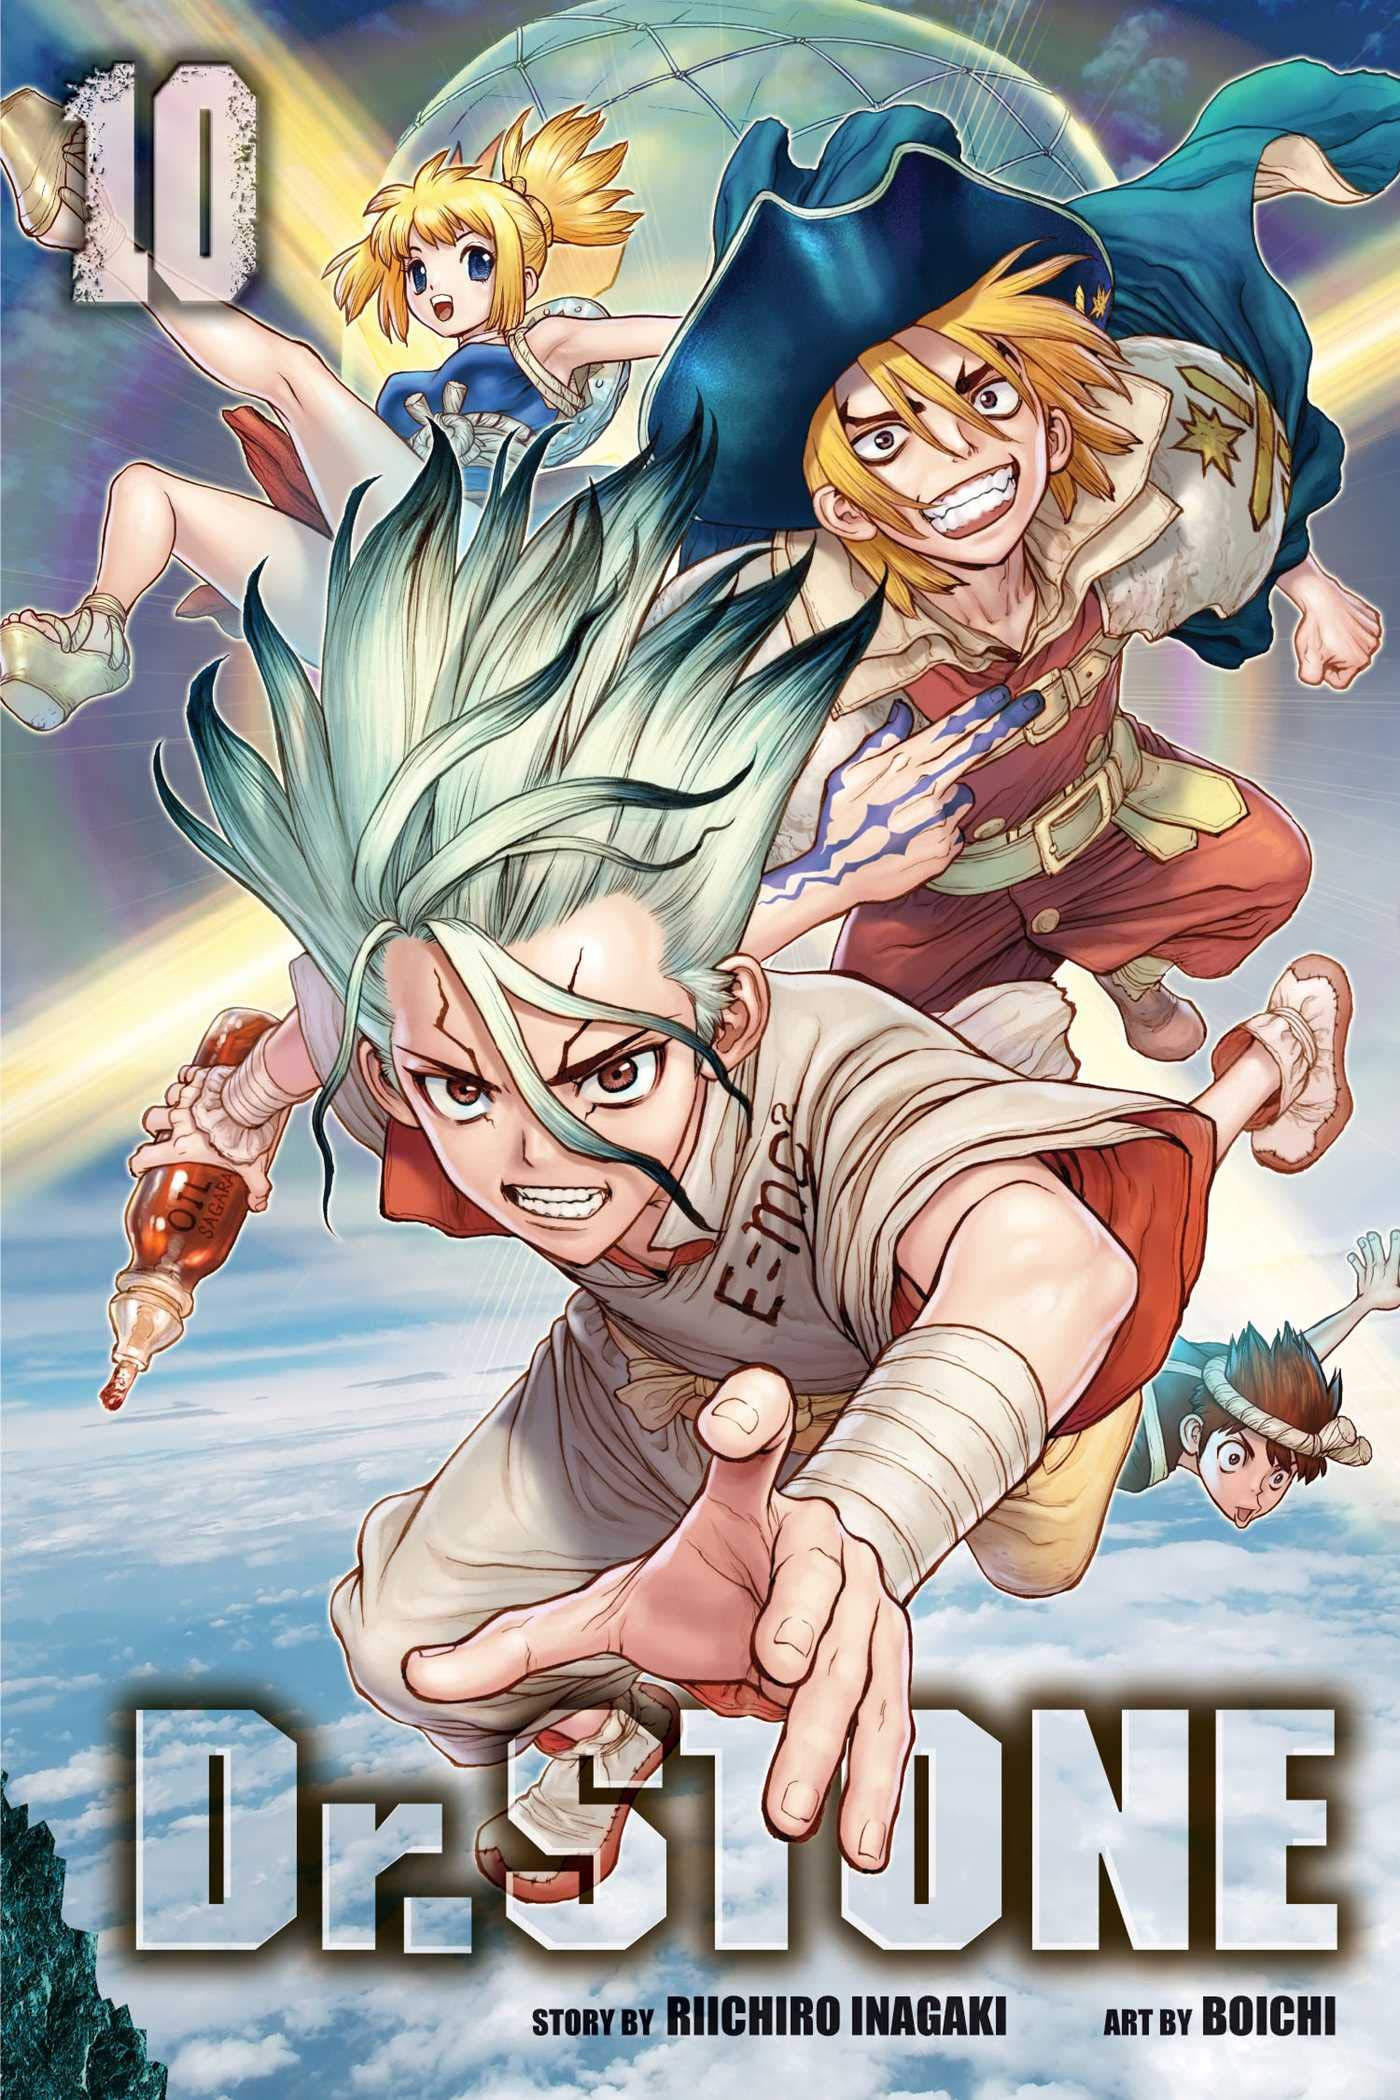 https://static.wikia.nocookie.net/dr-stone/images/d/d0/US_Volume_10.png/revision/latest?cb=20191214121257